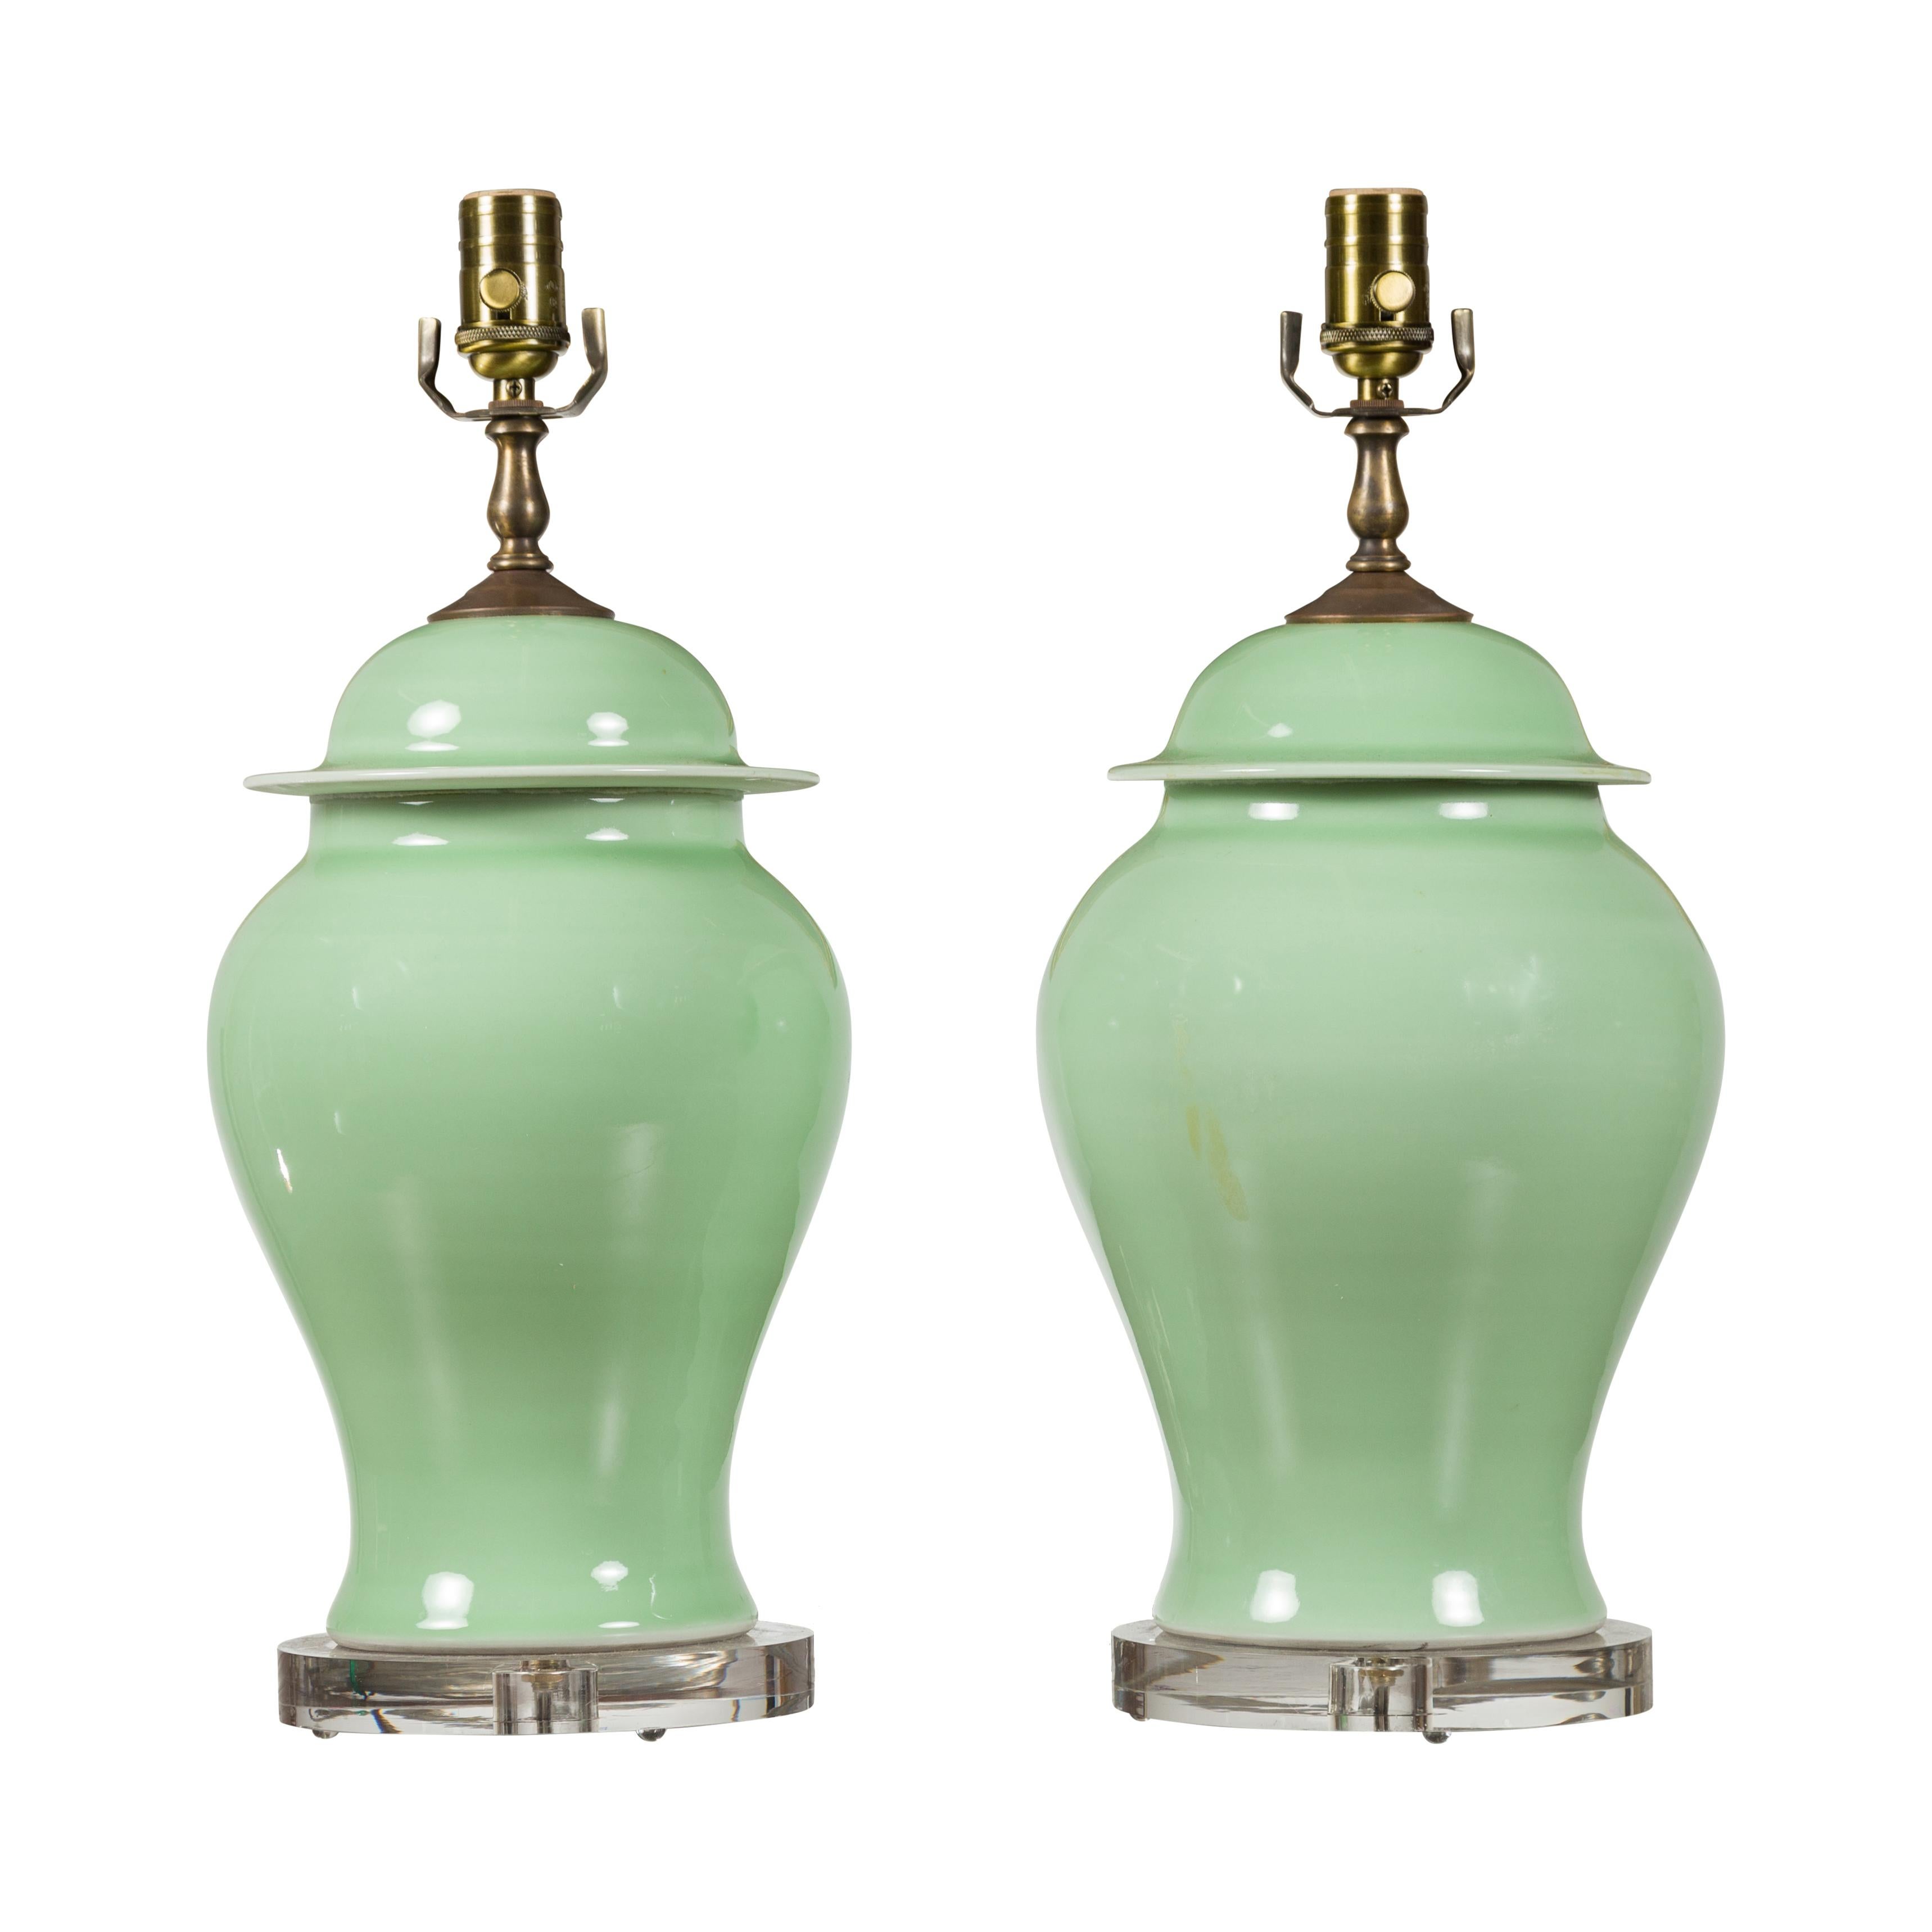 Pair of Green Porcelain Lidded Jar Table Lamps with Round Lucite Bases, Wired For Sale